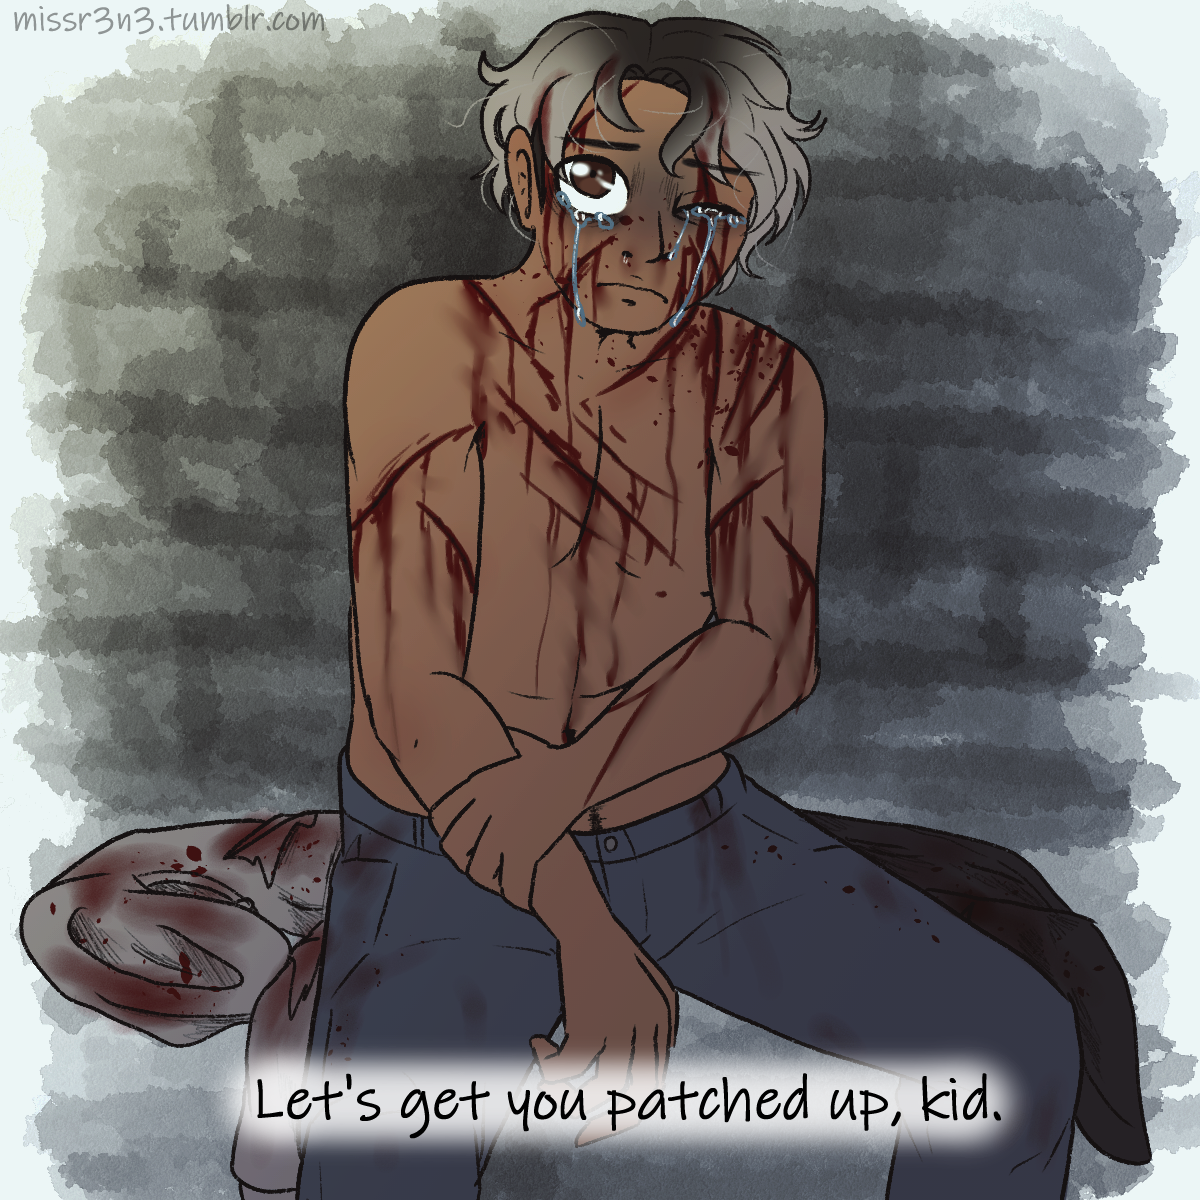 illustration of jonah covered in cuts with his shirt off. caption underneath reads 'let's get you patched up, kid.'